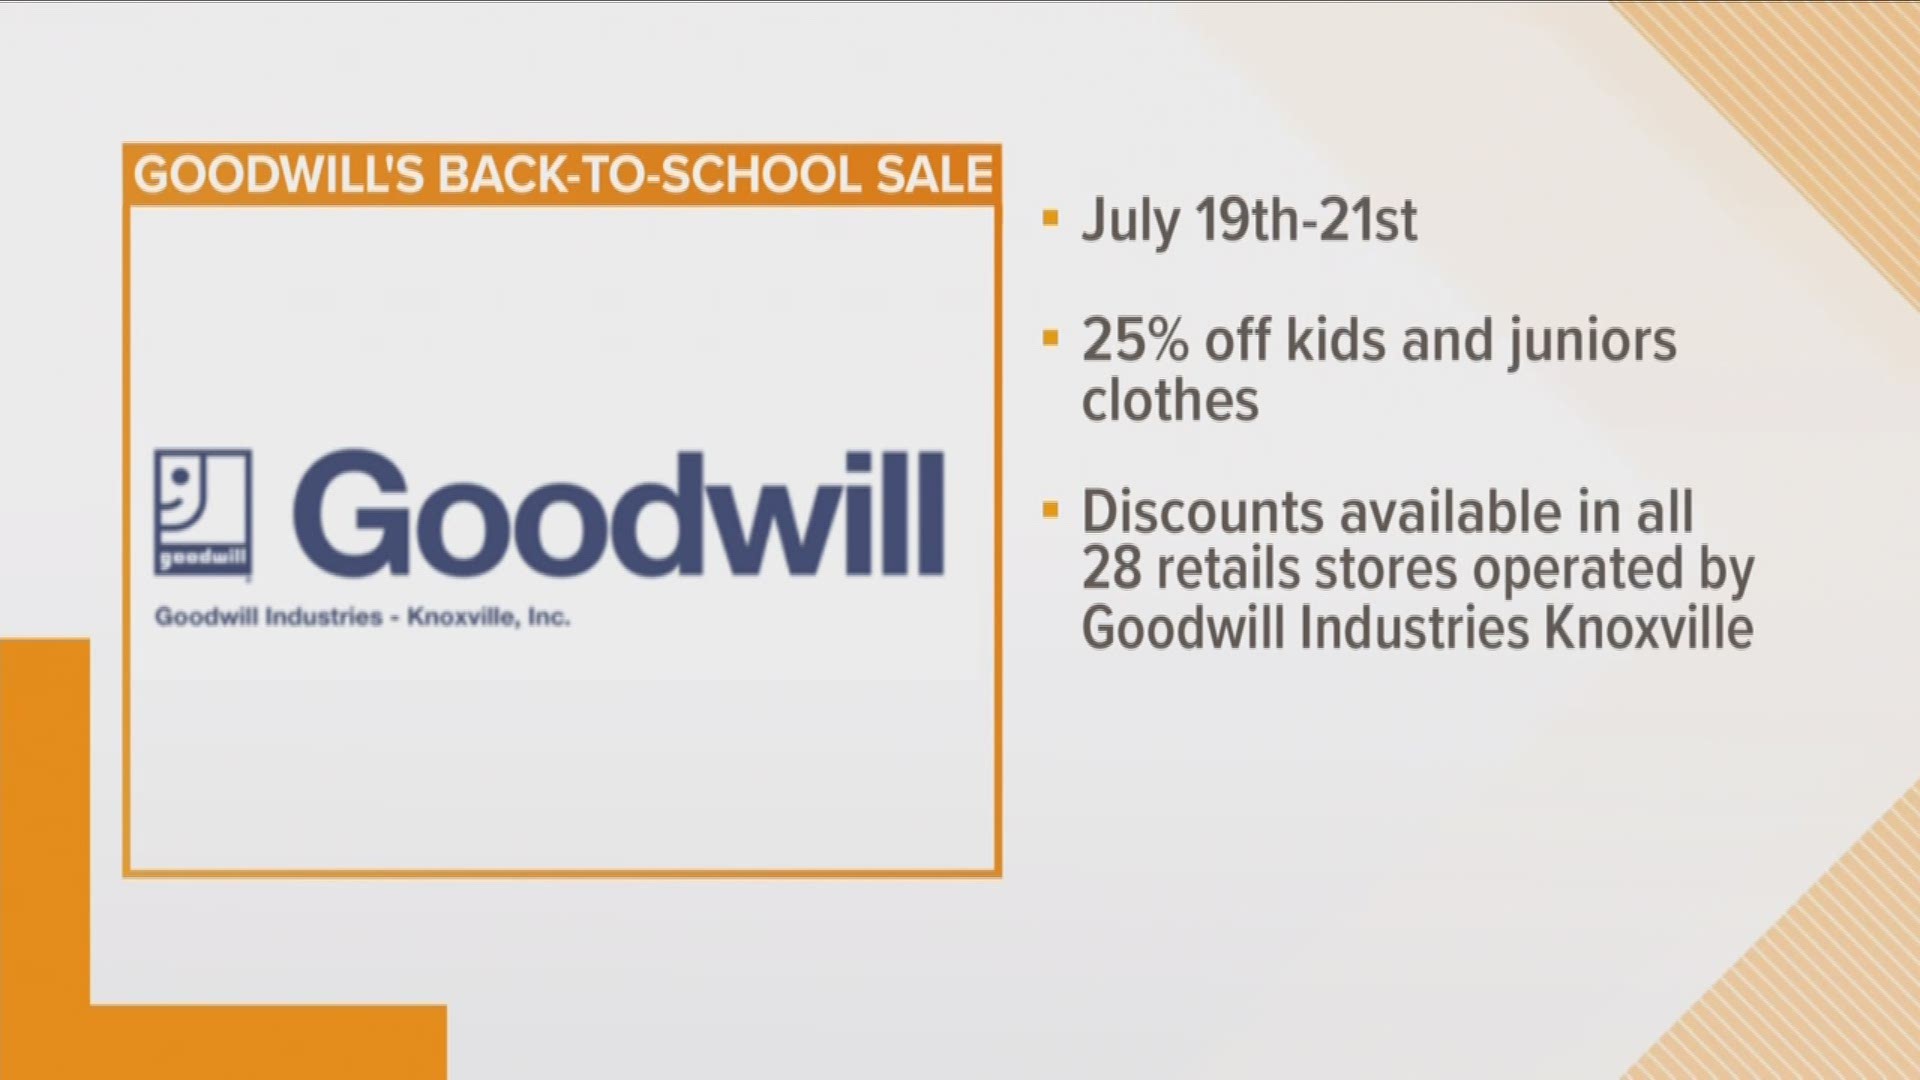 Goodwill wants to help you cut costs on back to school clothes. 10News Reporter Yvonne Thomas is live with more on the three day Back-to-School sale starting tomorrow.